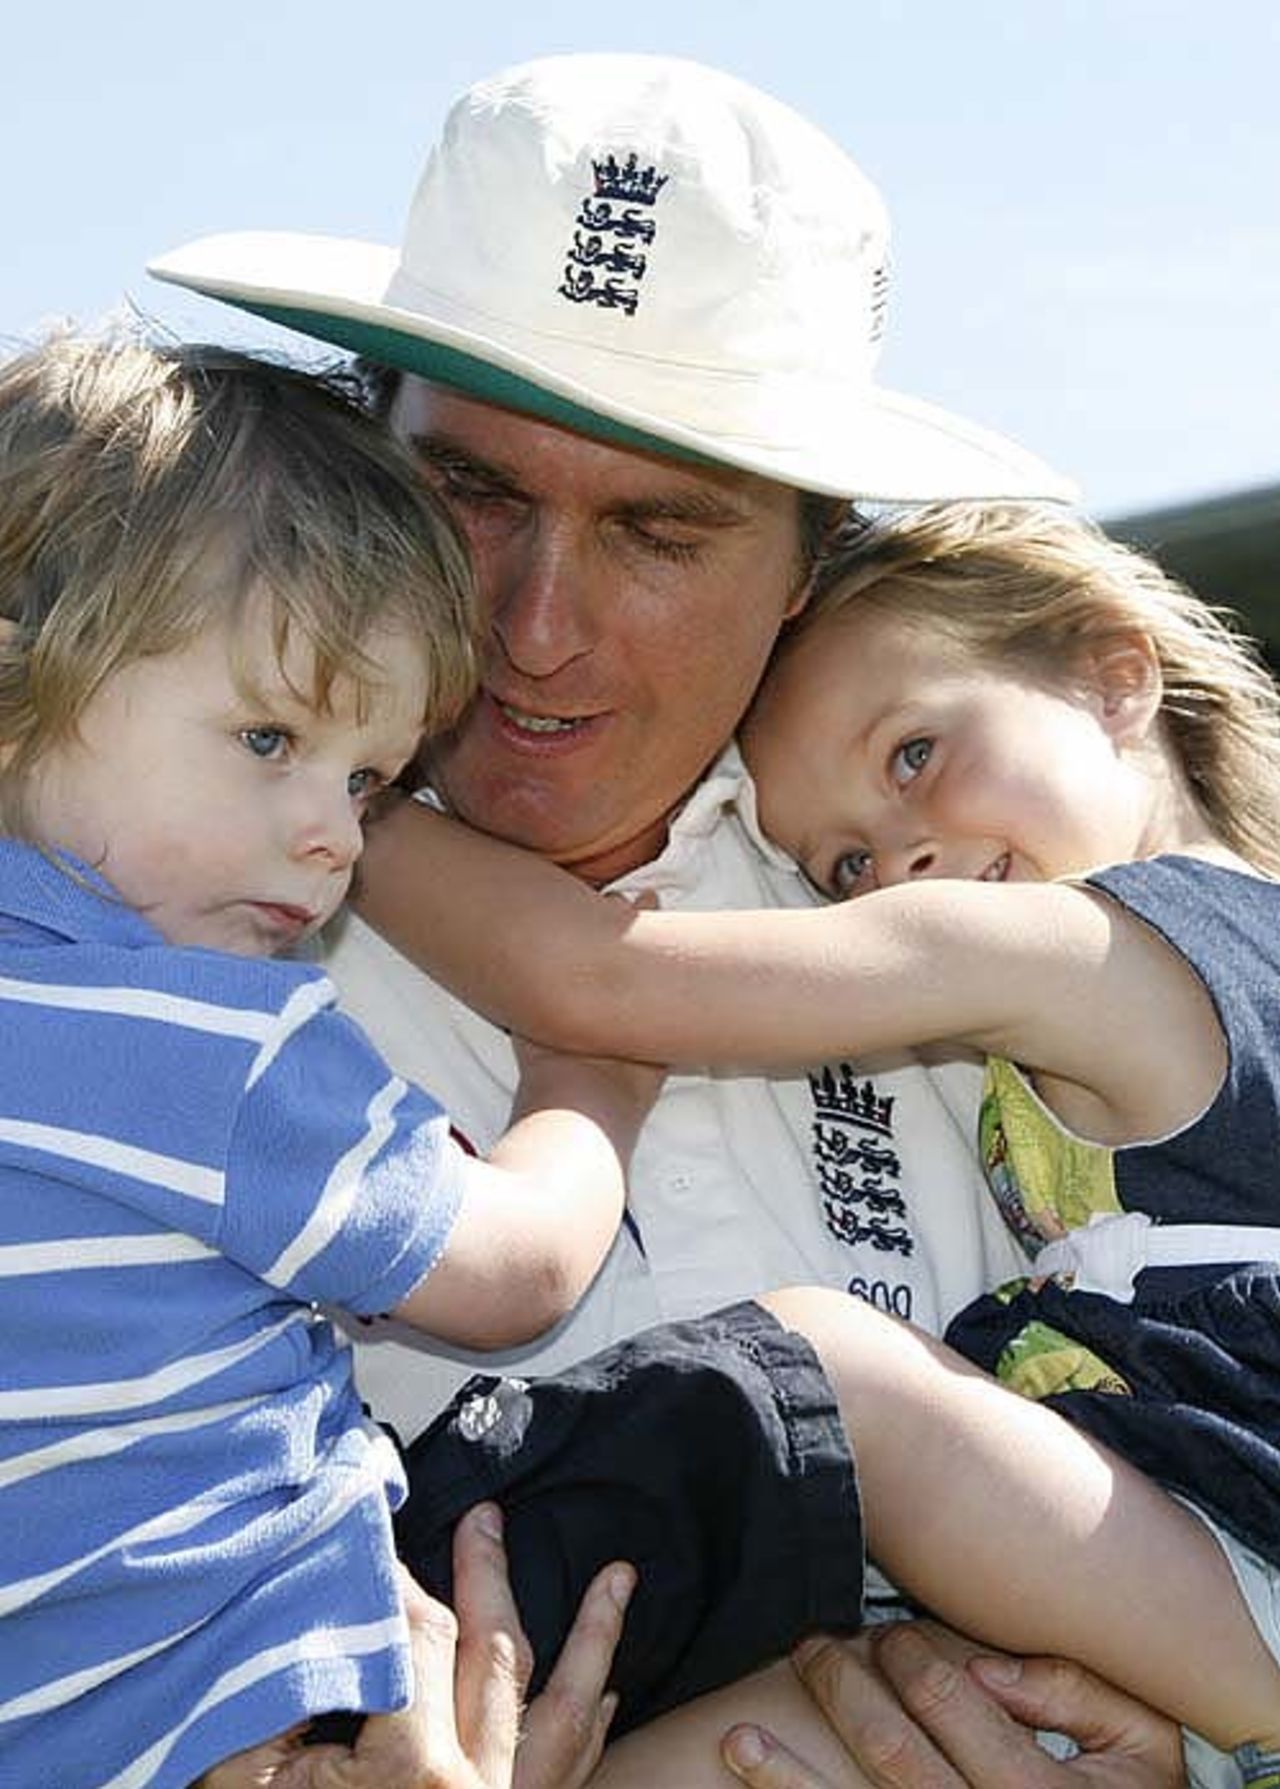 Michael Vaughan meets his children after the end of a long tour, New Zealand v England, 3rd Test, Napier, March 26, 2008